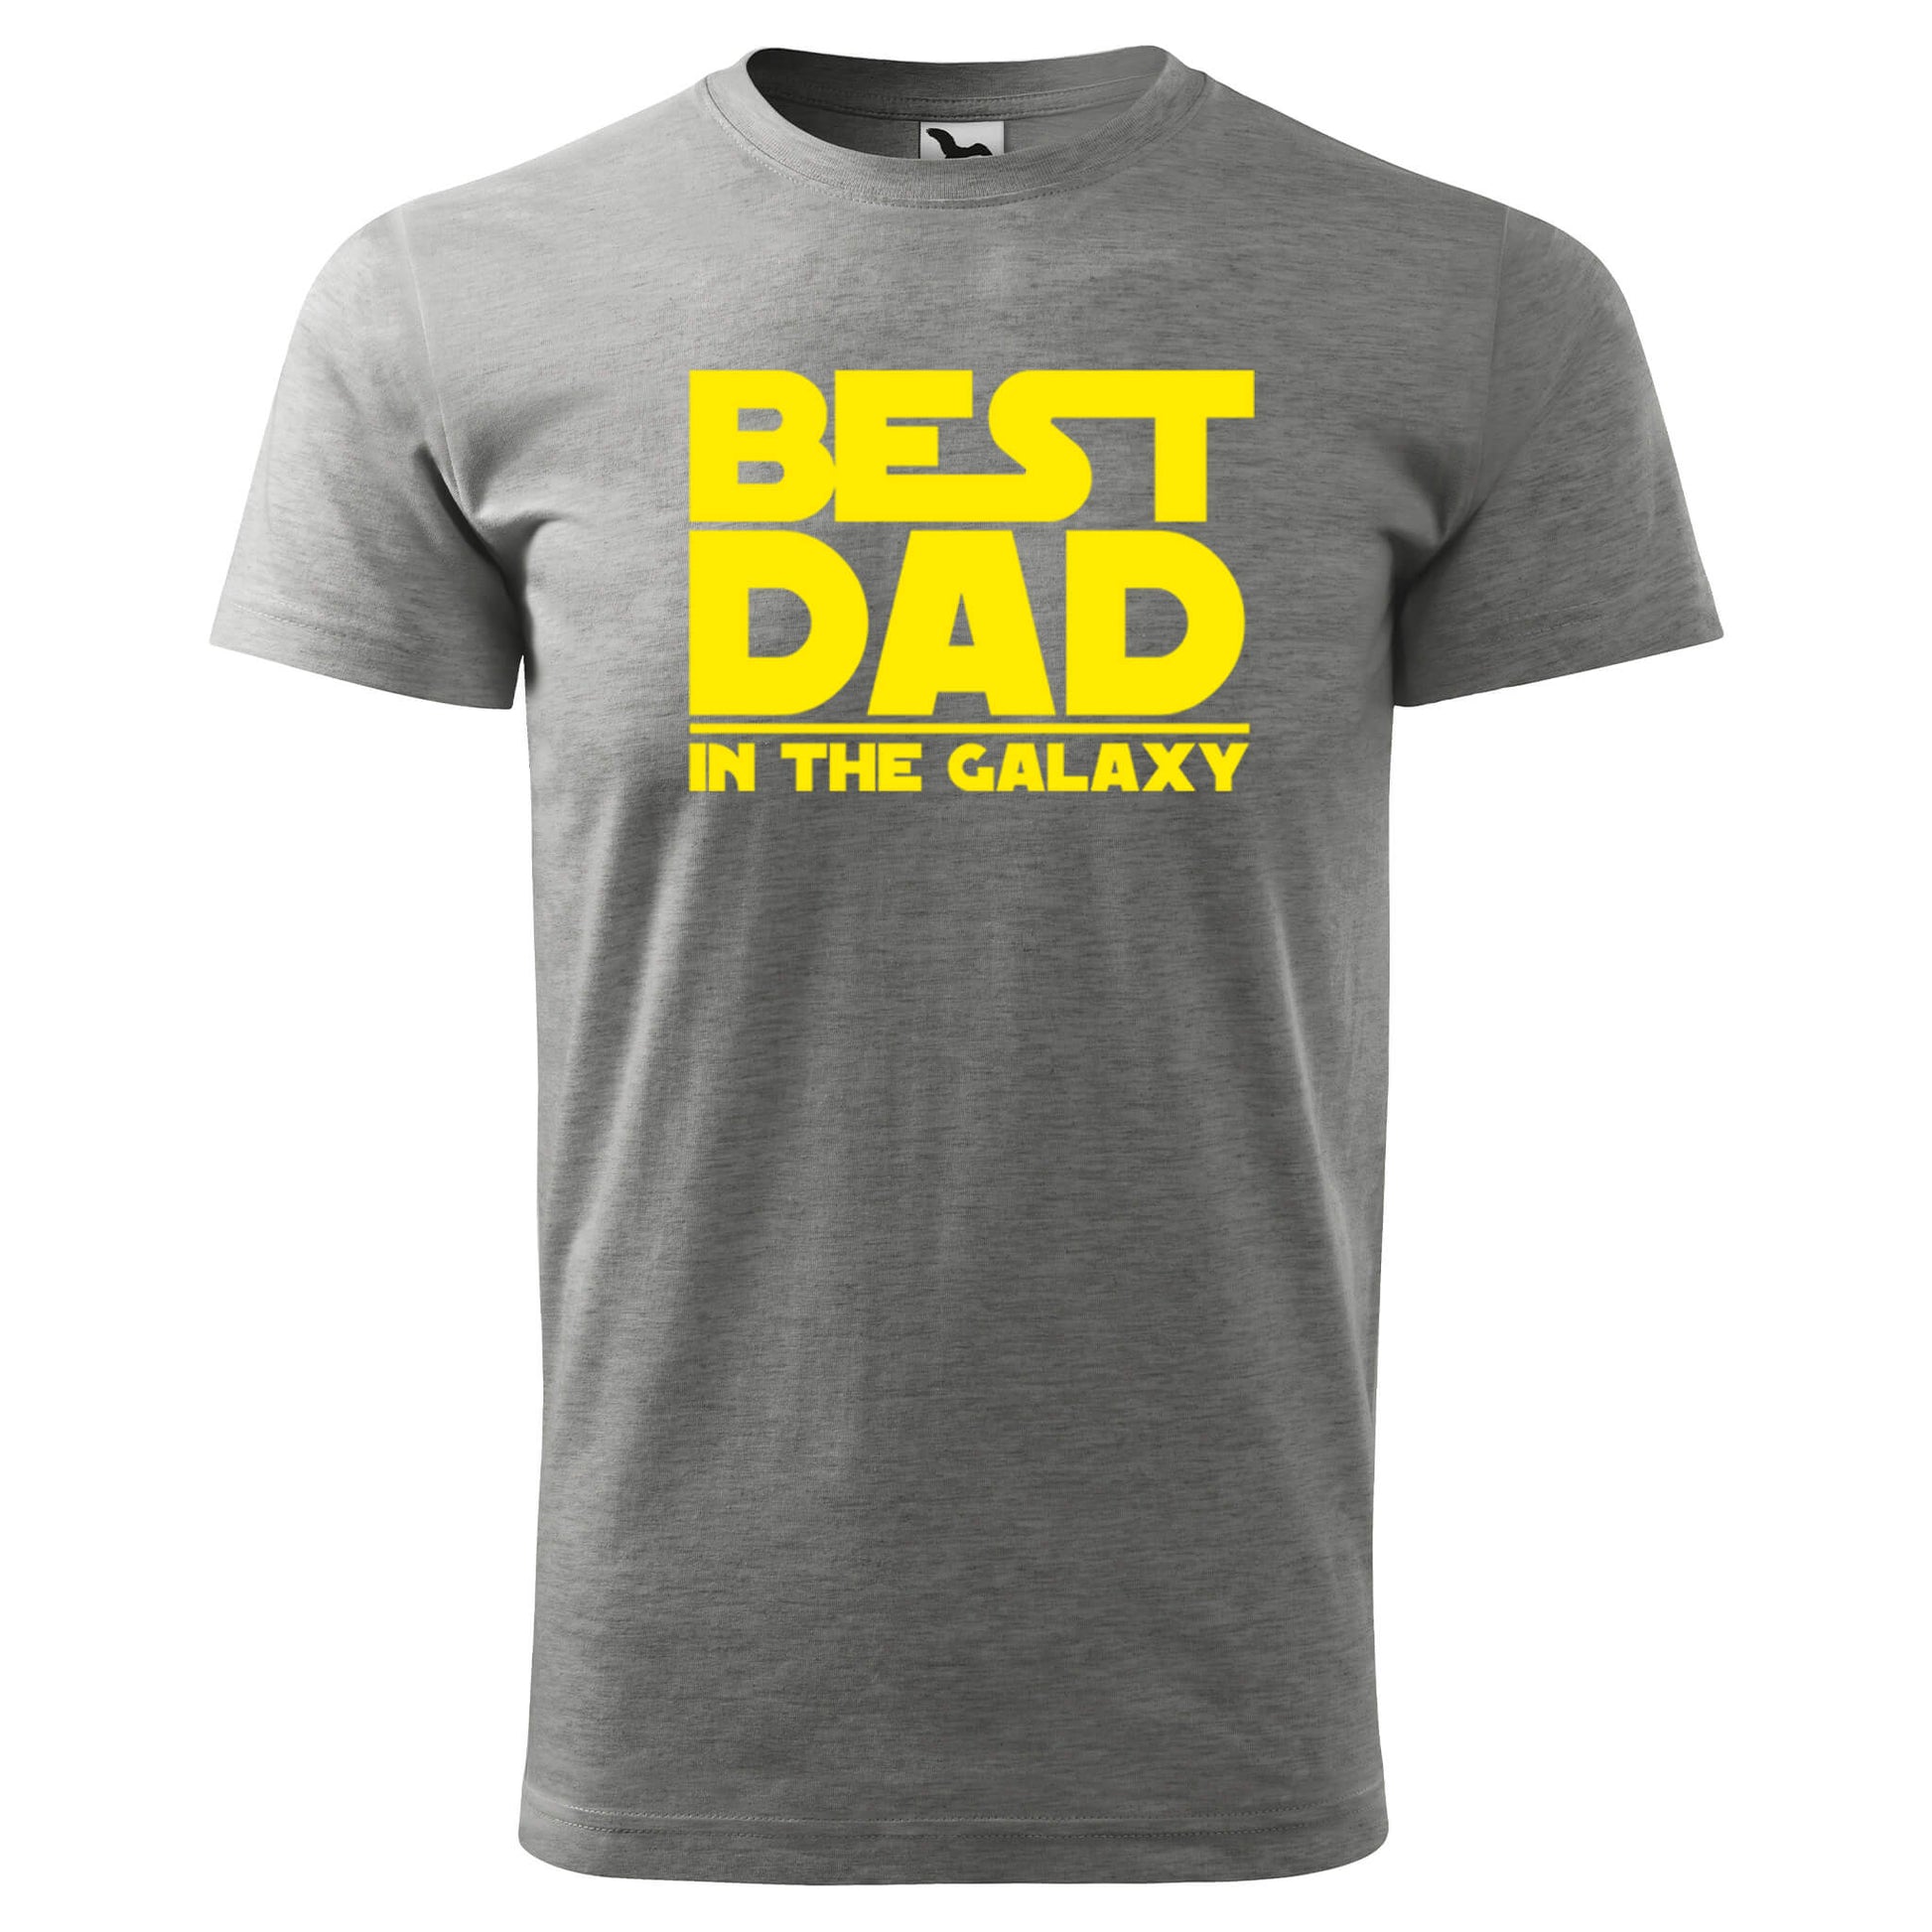 T-shirt - Best DAD in the galaxy - rvdesignprint